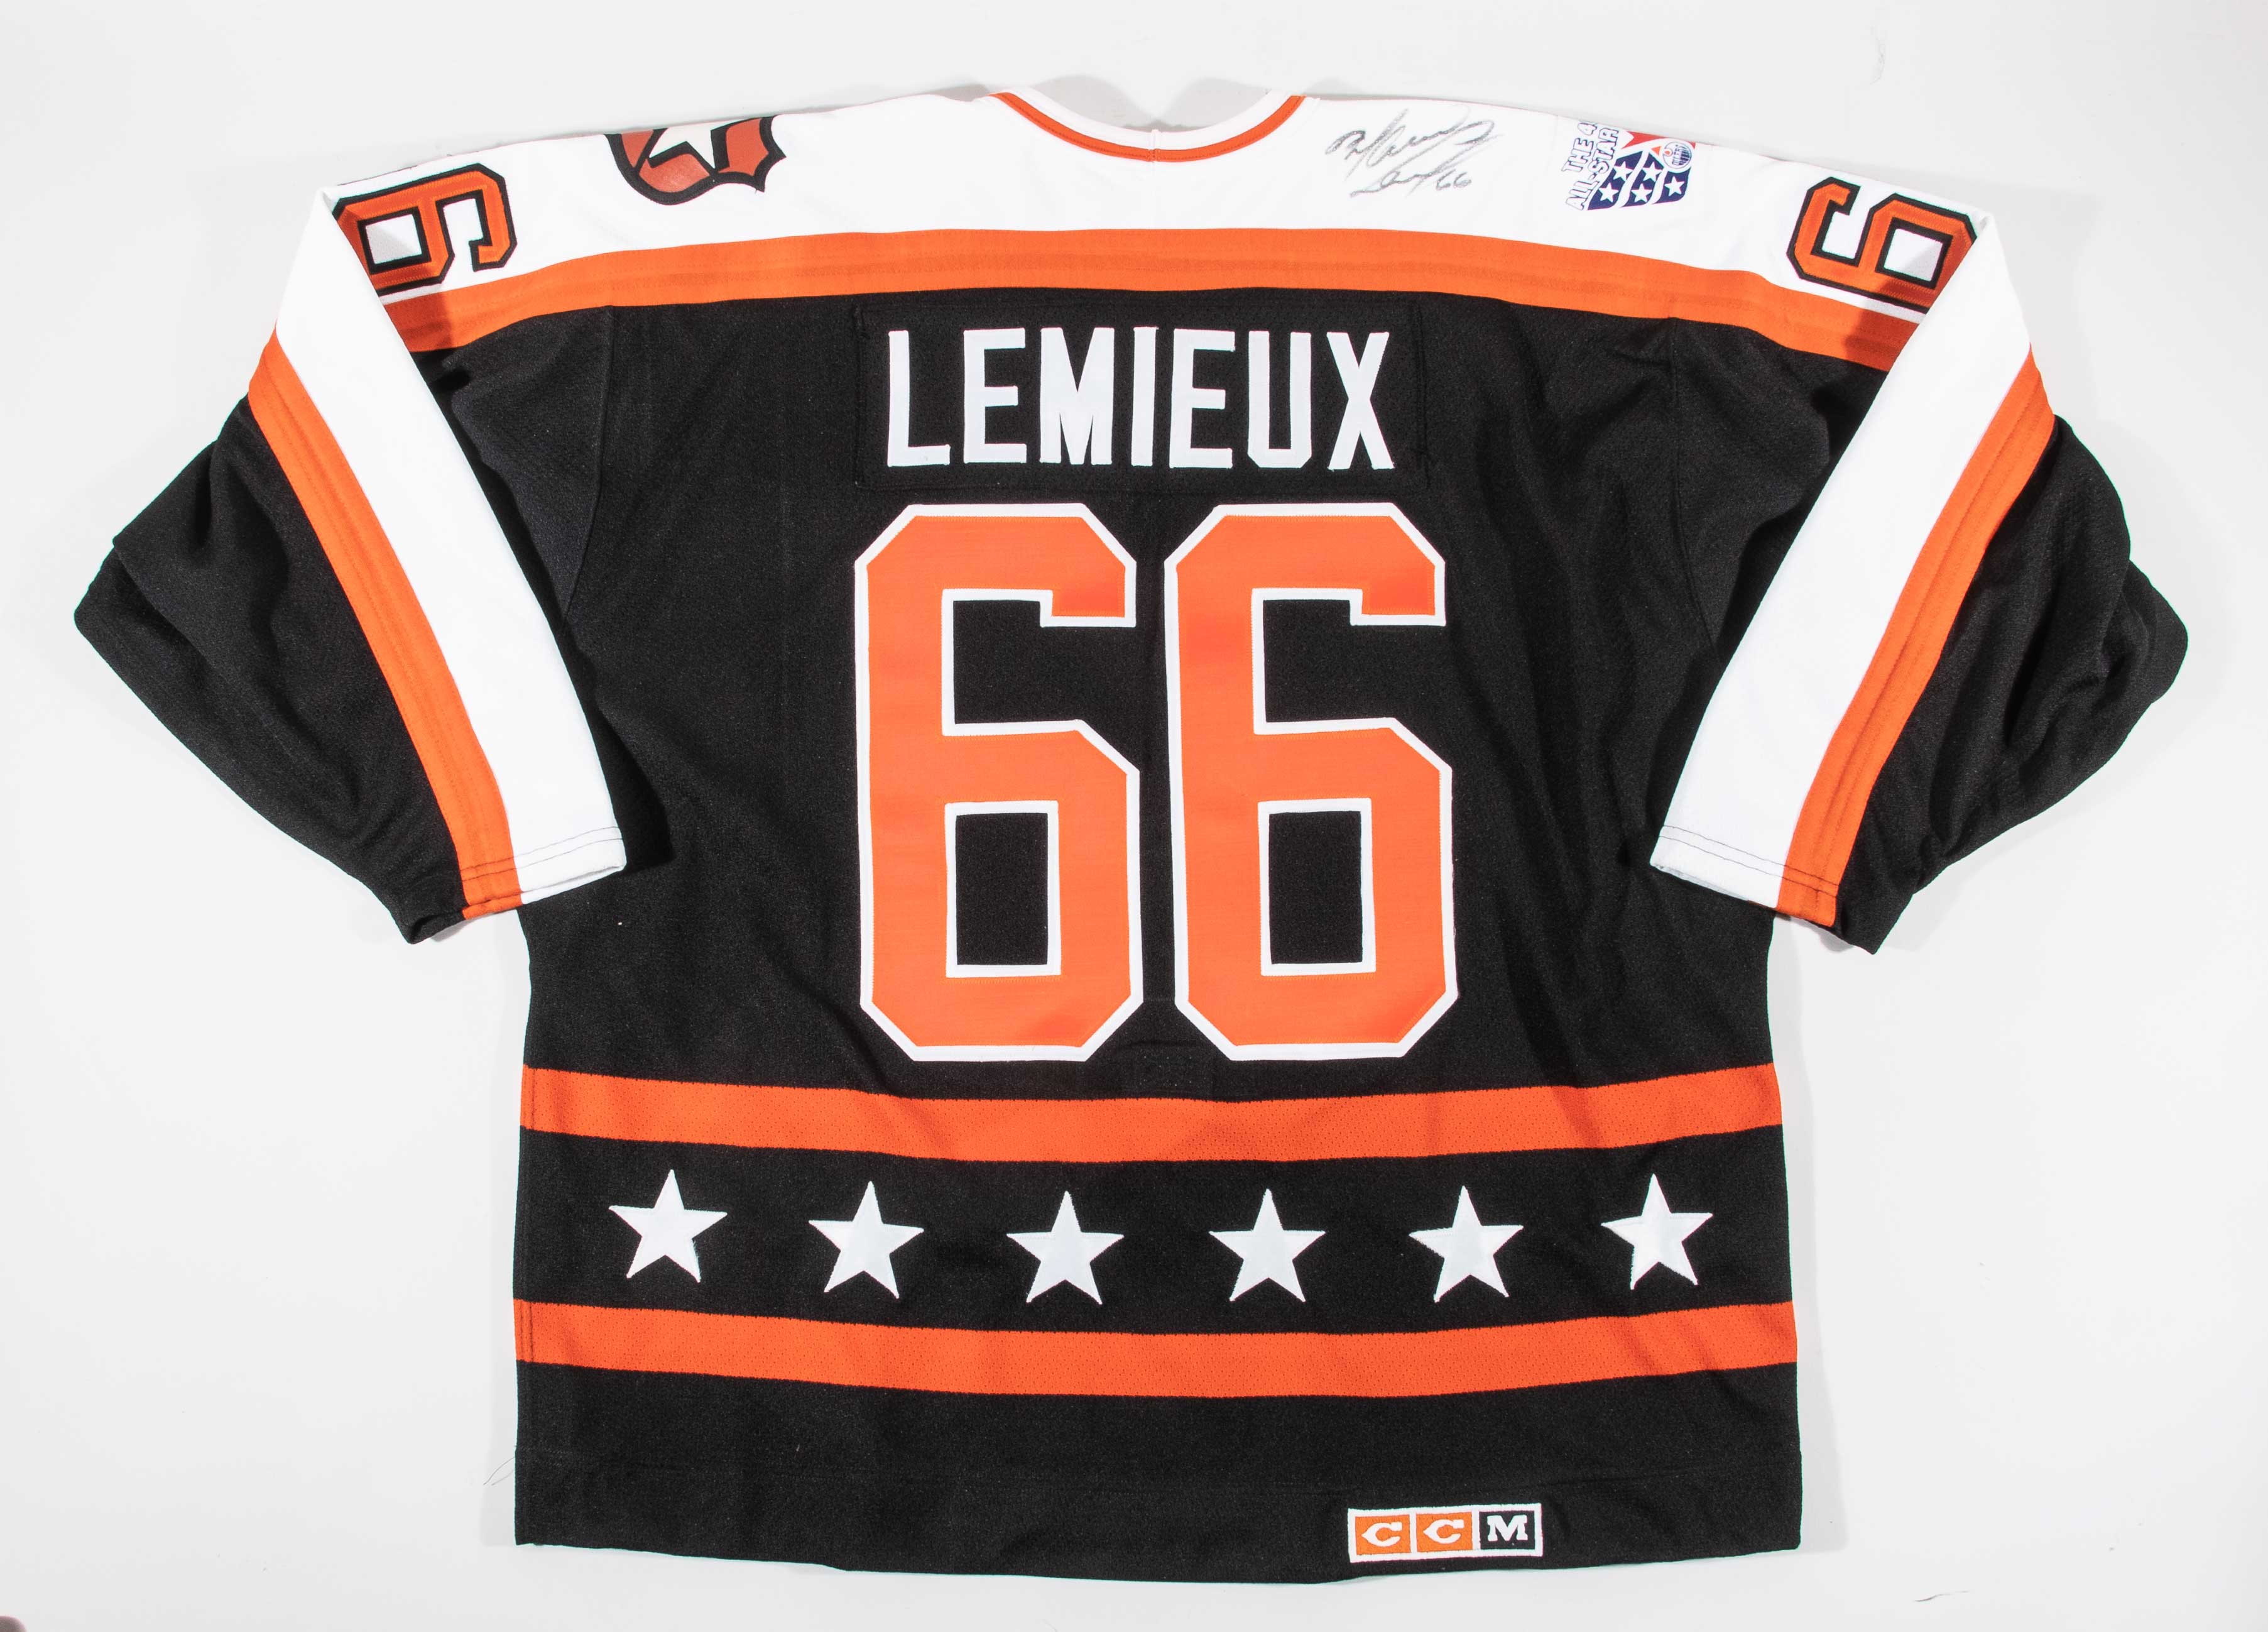 Mario Lemieux on X: Want the sweet Wales Conference All-Star Jersey signed  & worn by Mario himself at the 2017 Lemieux Camp? Bid now:    / X